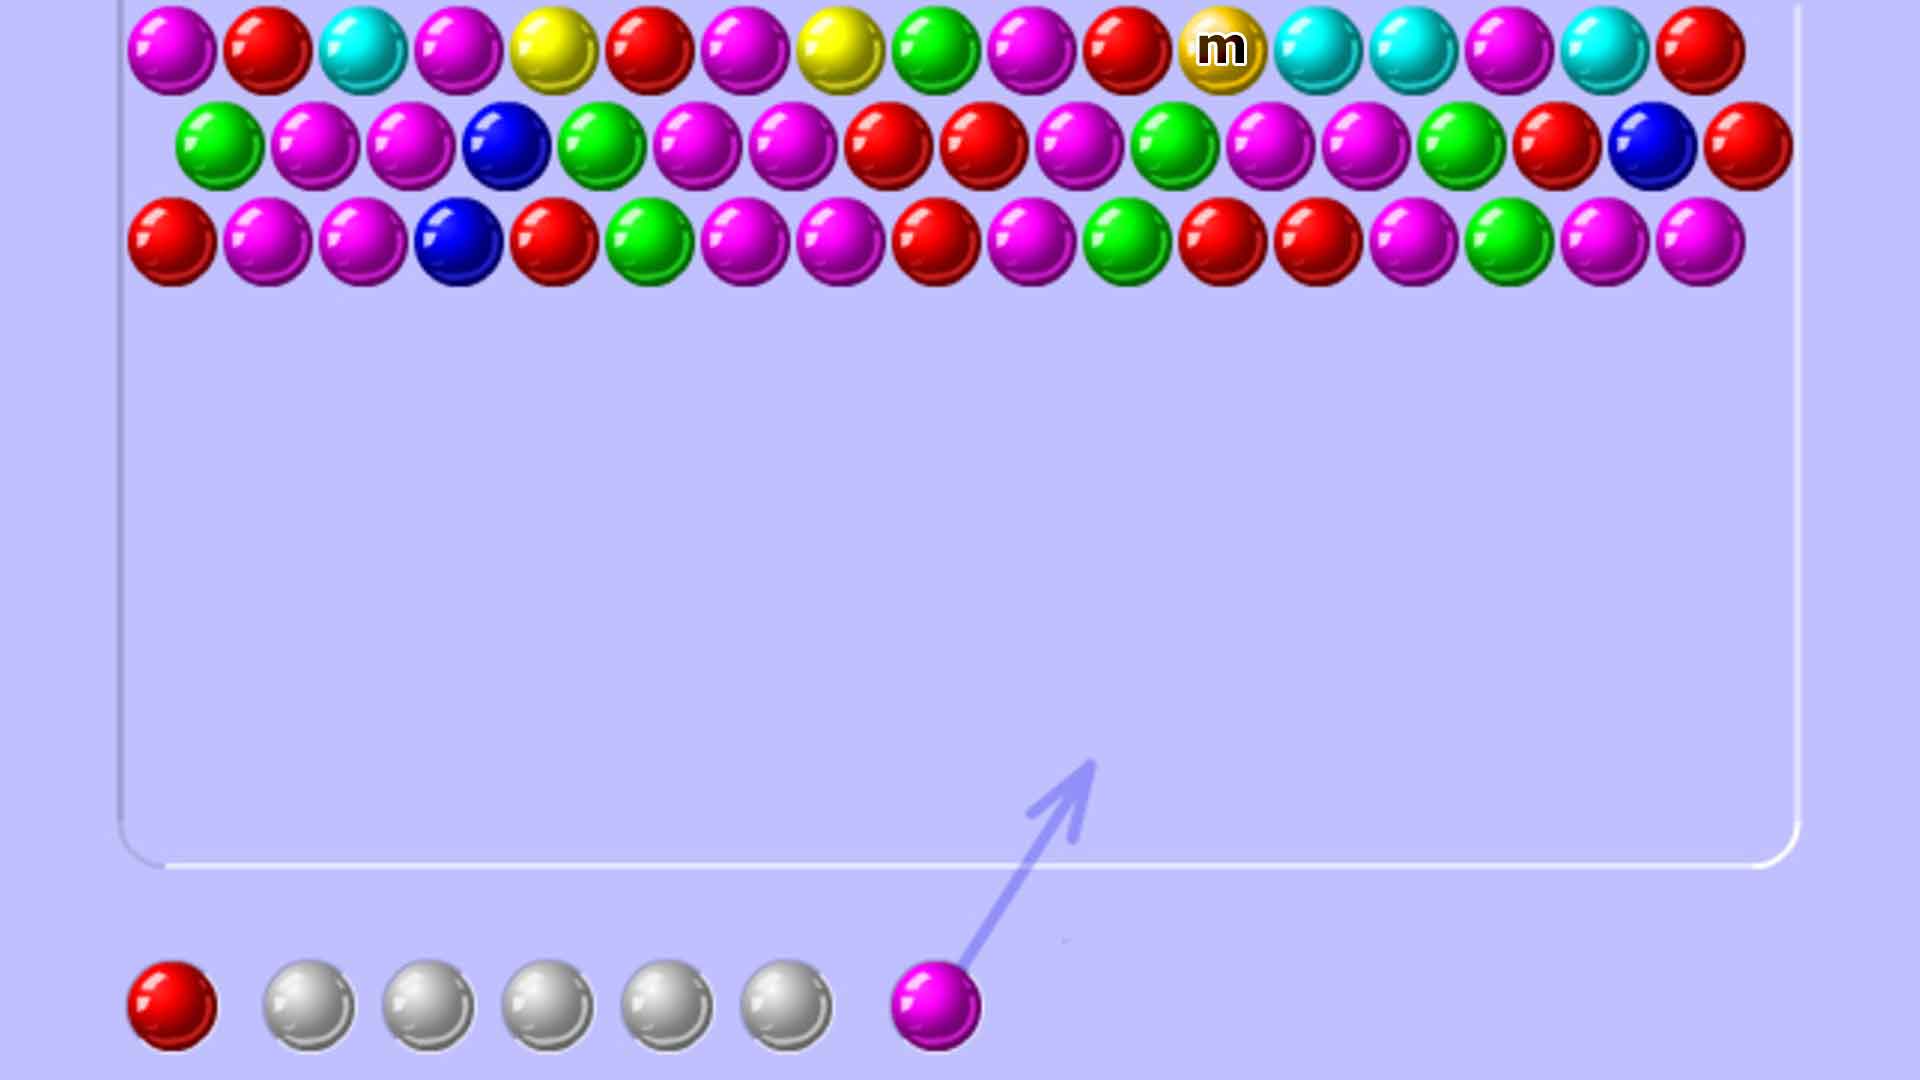 Bubble Shooter Game: Play This Fun Casual Game In Your Web Browser